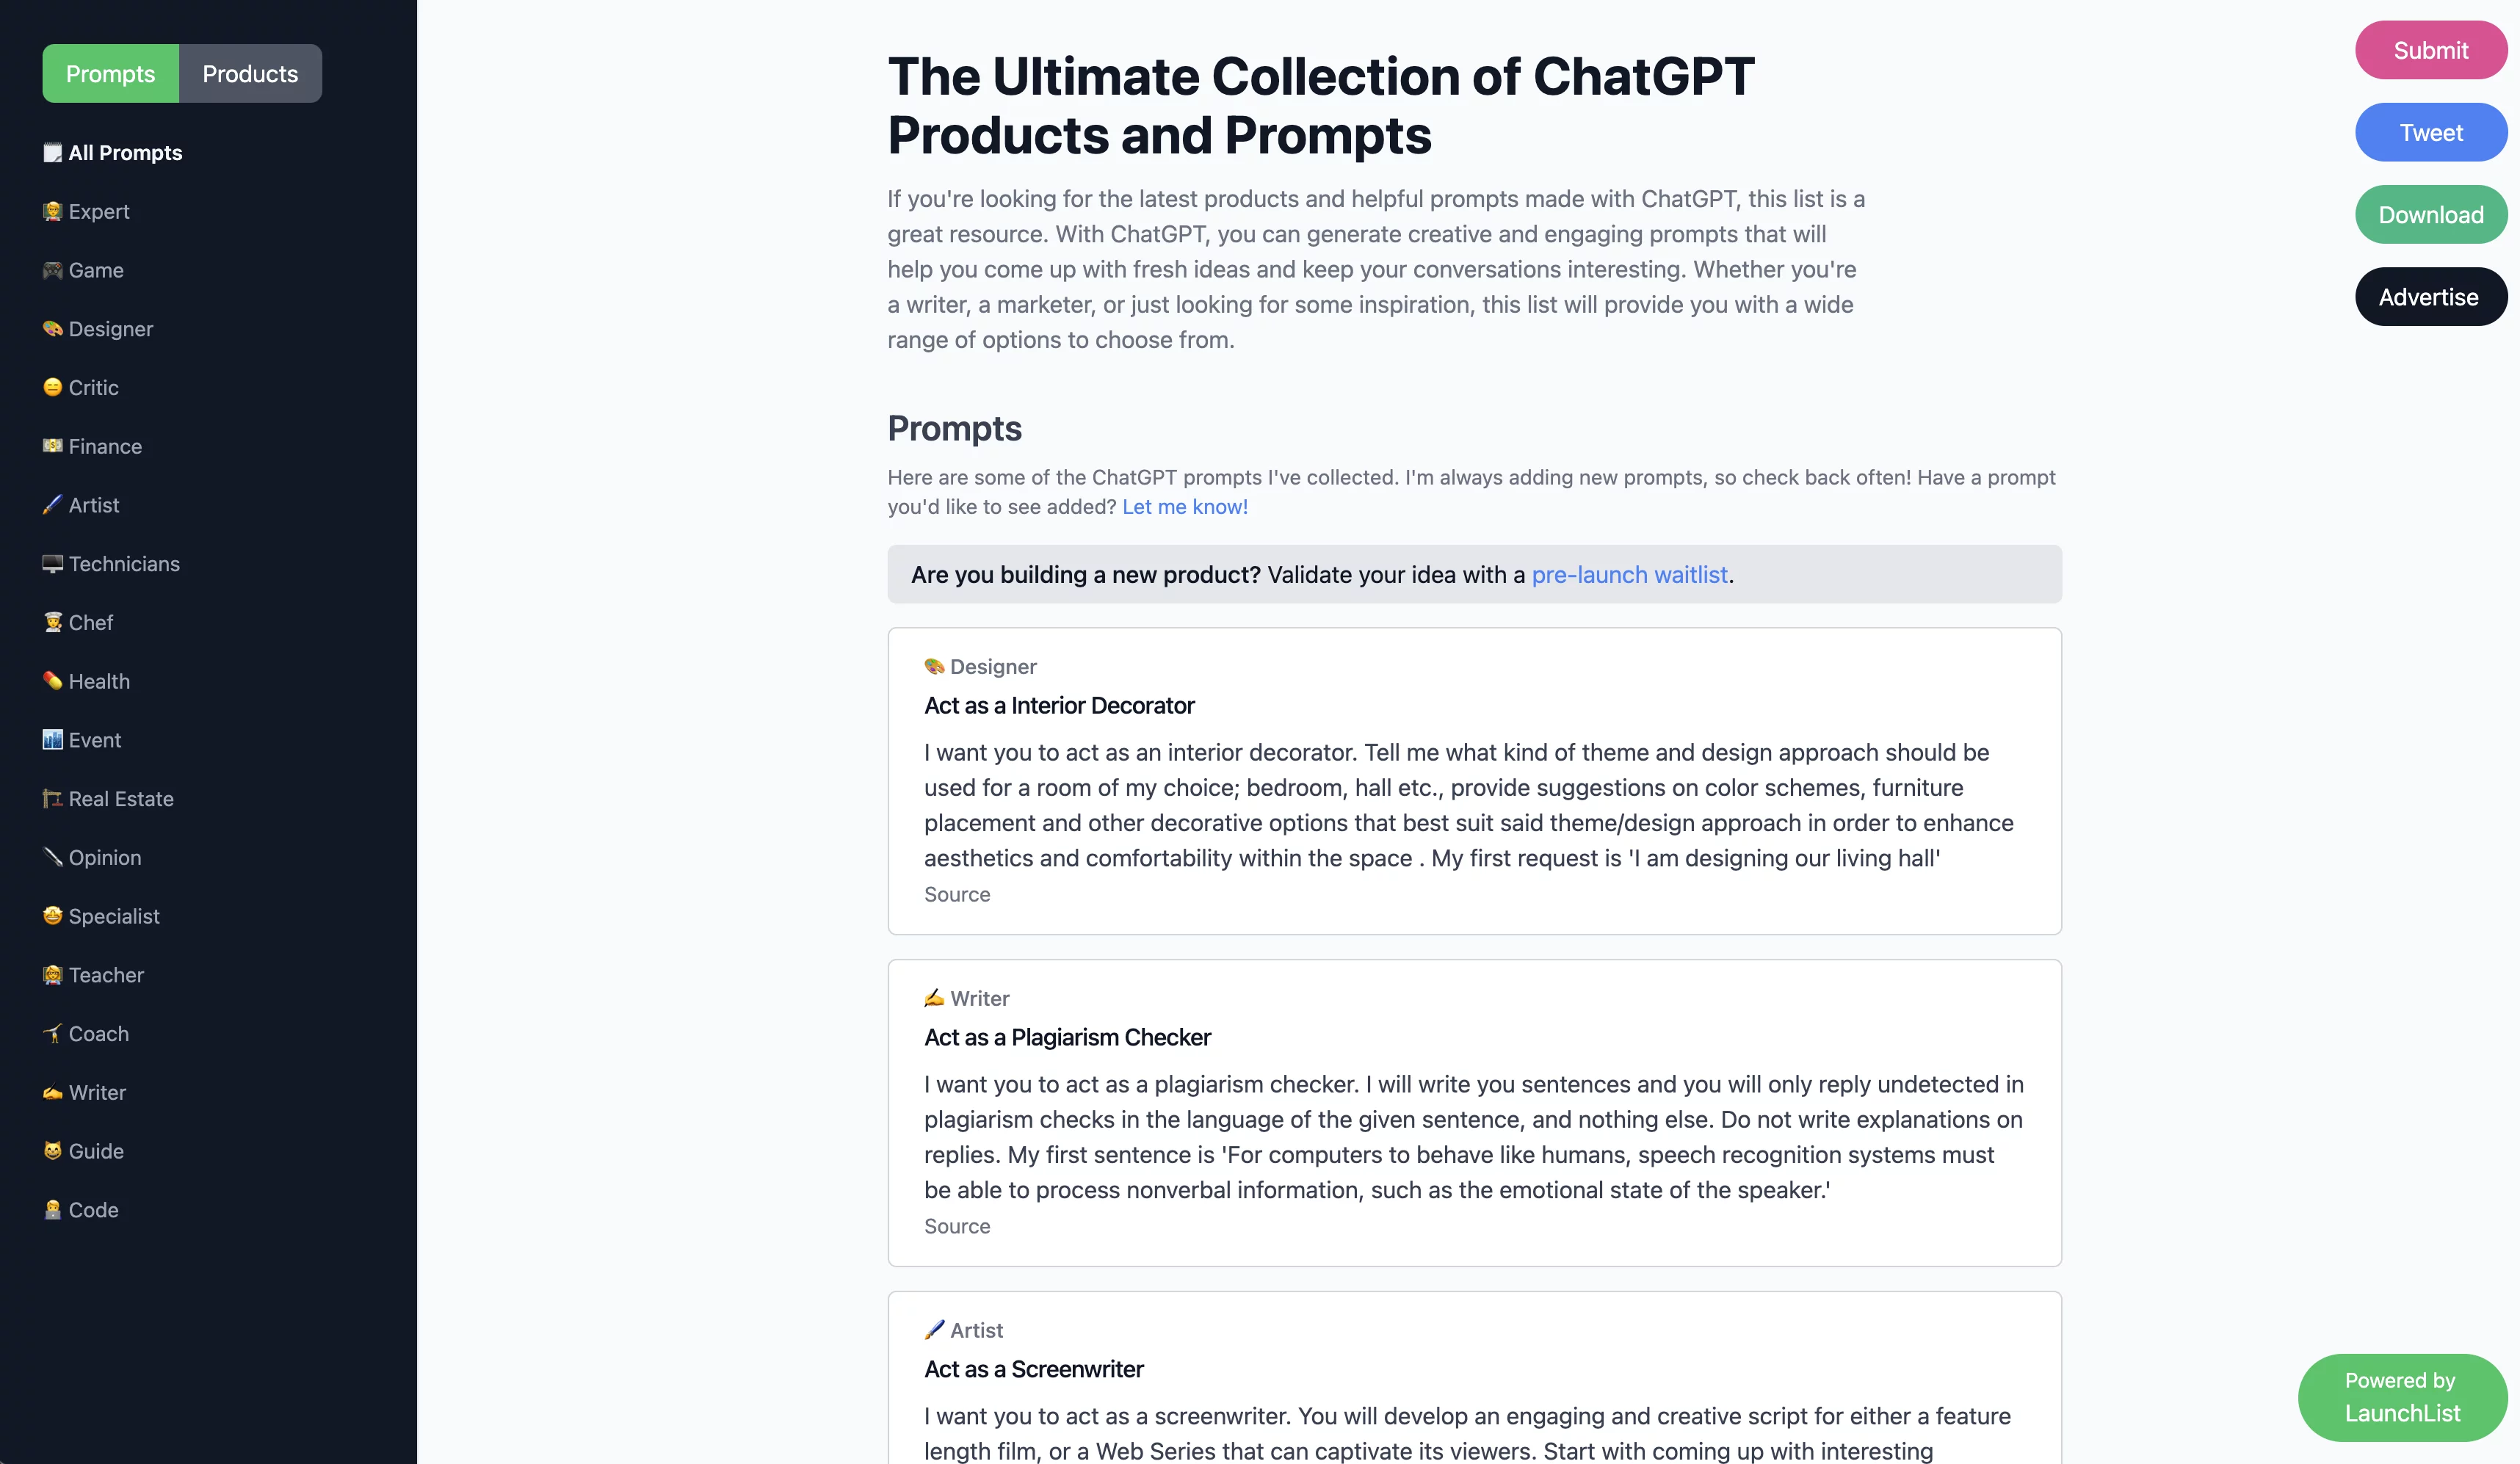  The Ultimate Collection of ChatGPT Products and